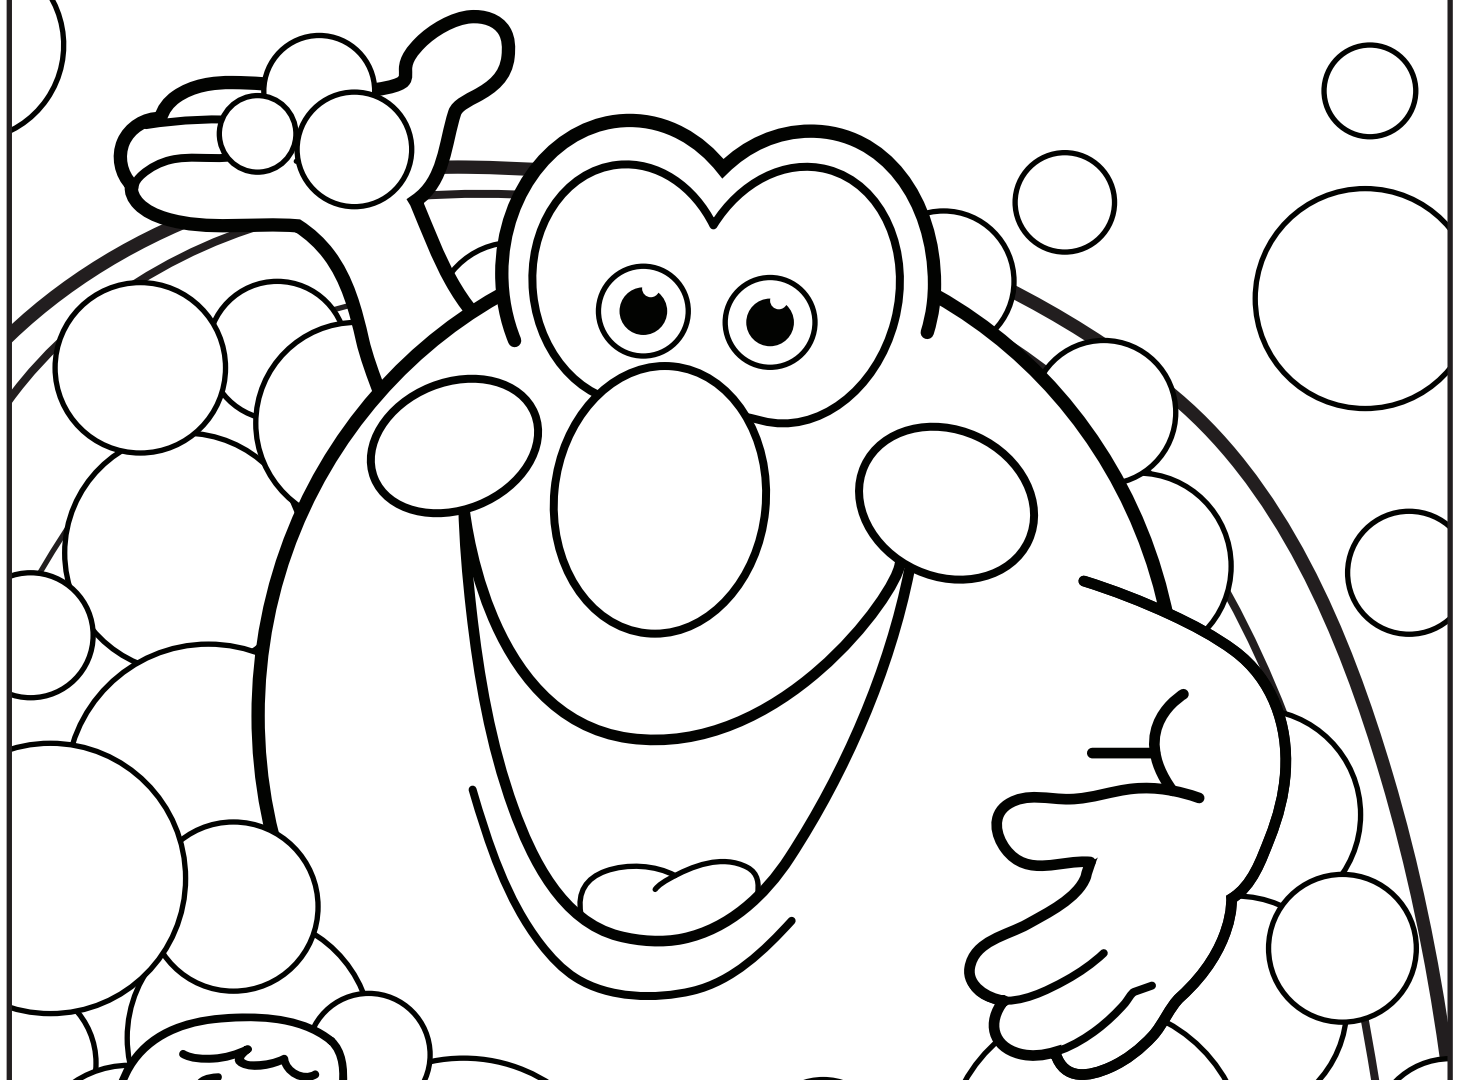 Quiver App Coloring Pages at GetColorings.com   Free ...